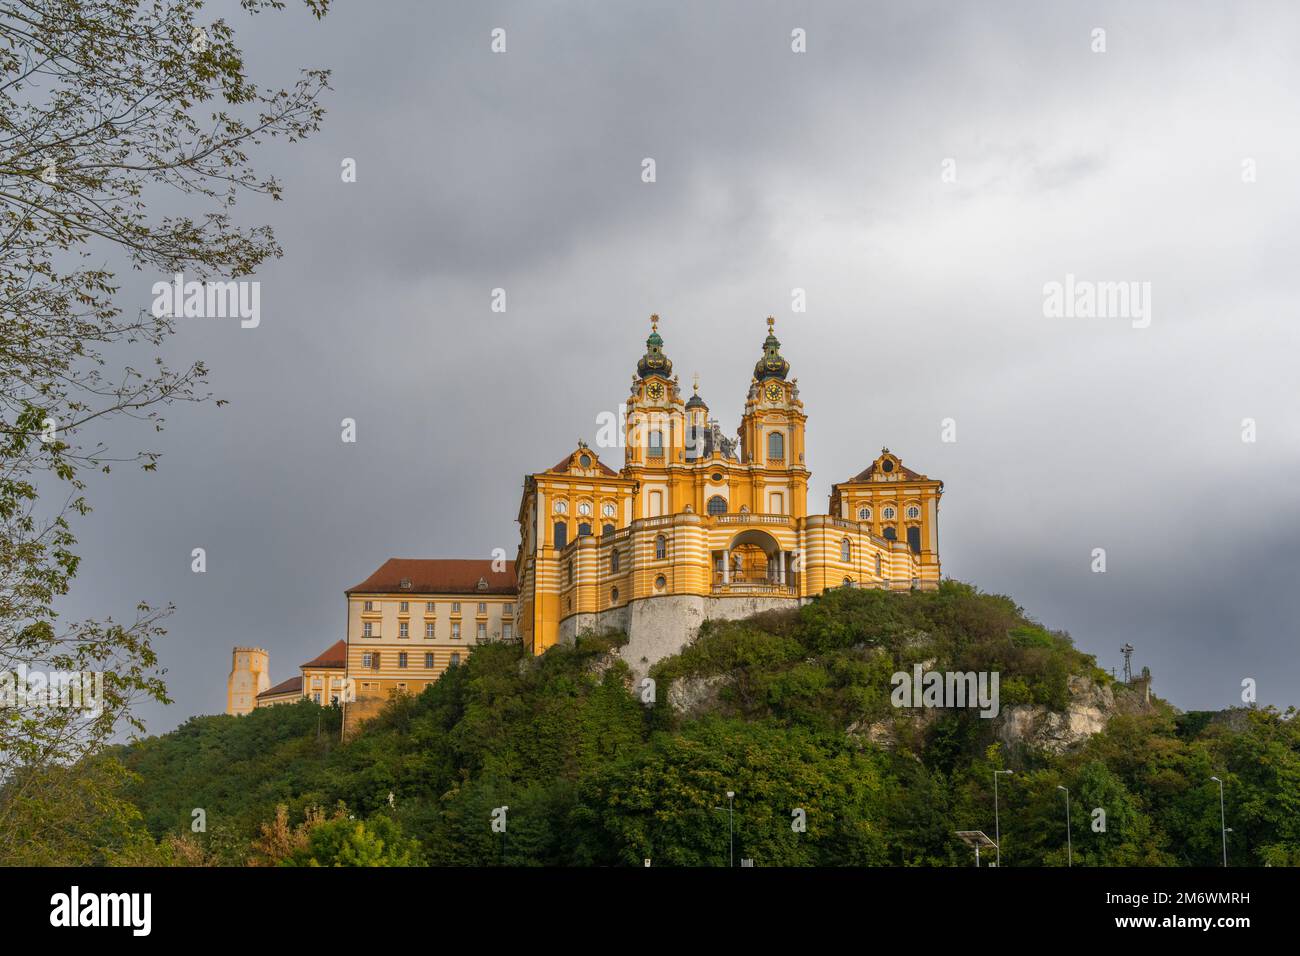 The historic Melk Abbey and church spires on the rocky promontory above the Danube River Stock Photo